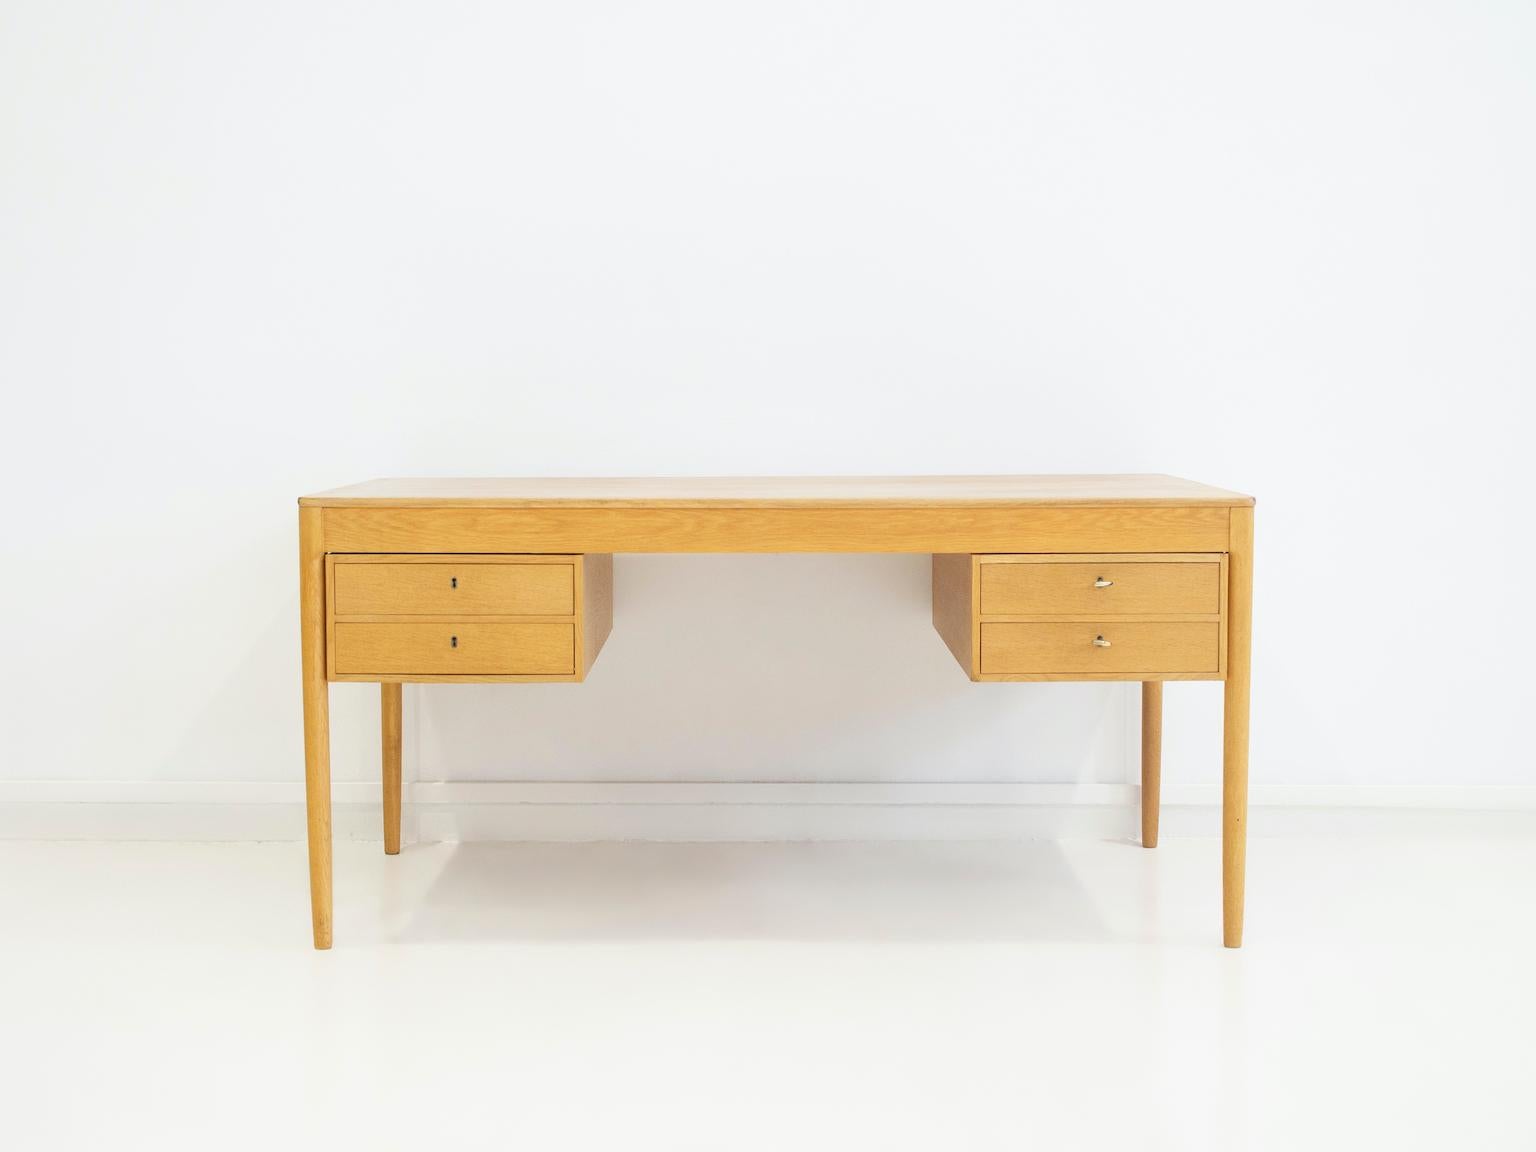 Oak desk designed by Yngvar Sandström and manufactured by AB Seffle Möbelfabrik in Sweden. The desk features two drawers on both sides that can be easily removed. Keys included. Stamped by maker underneath.